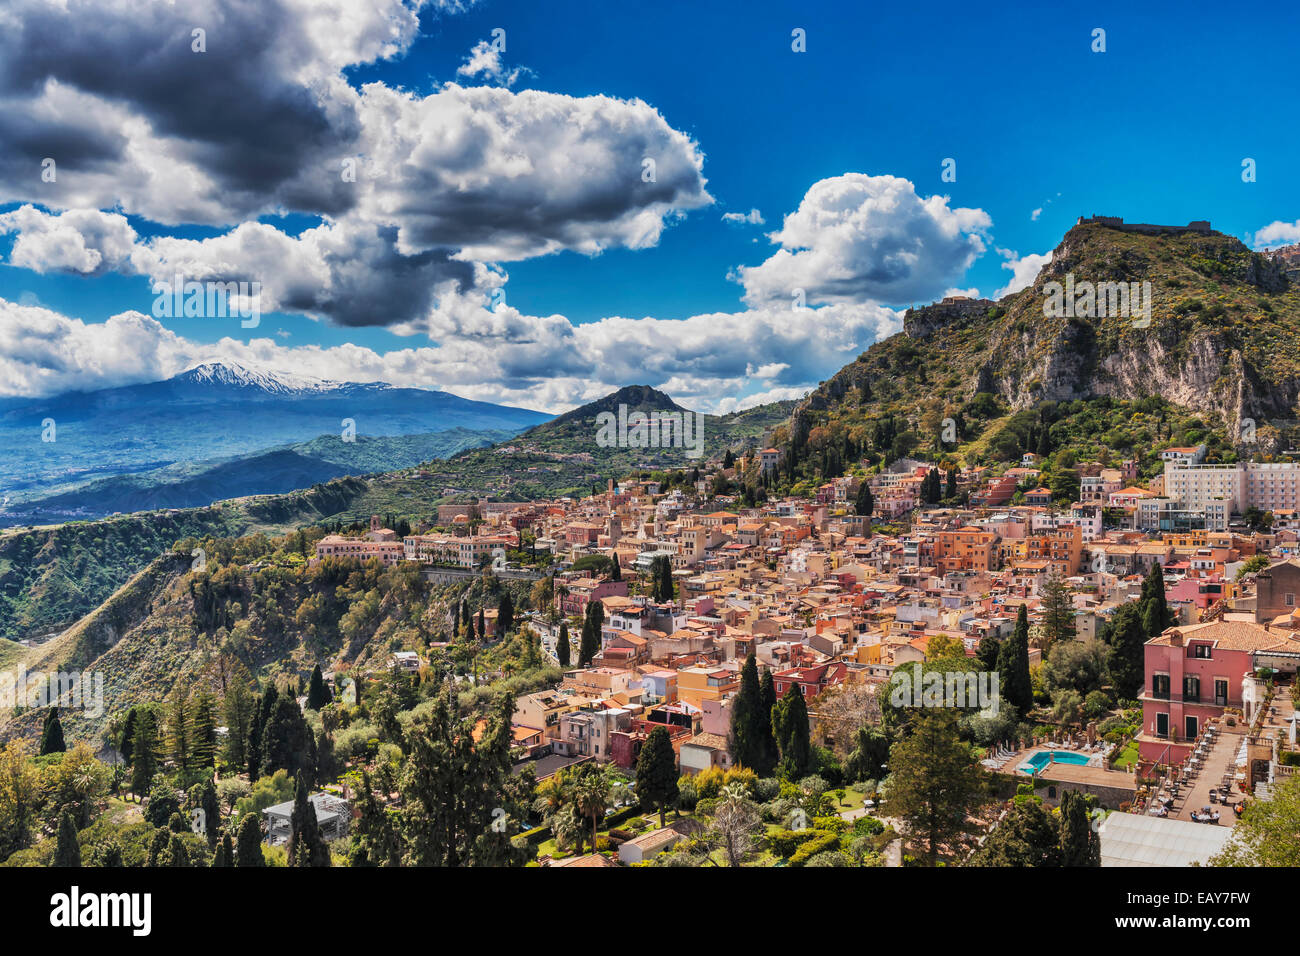 View on the town Taormina and Mount Etna, Province Messina, Sicily, Italy, Europe Stock Photo